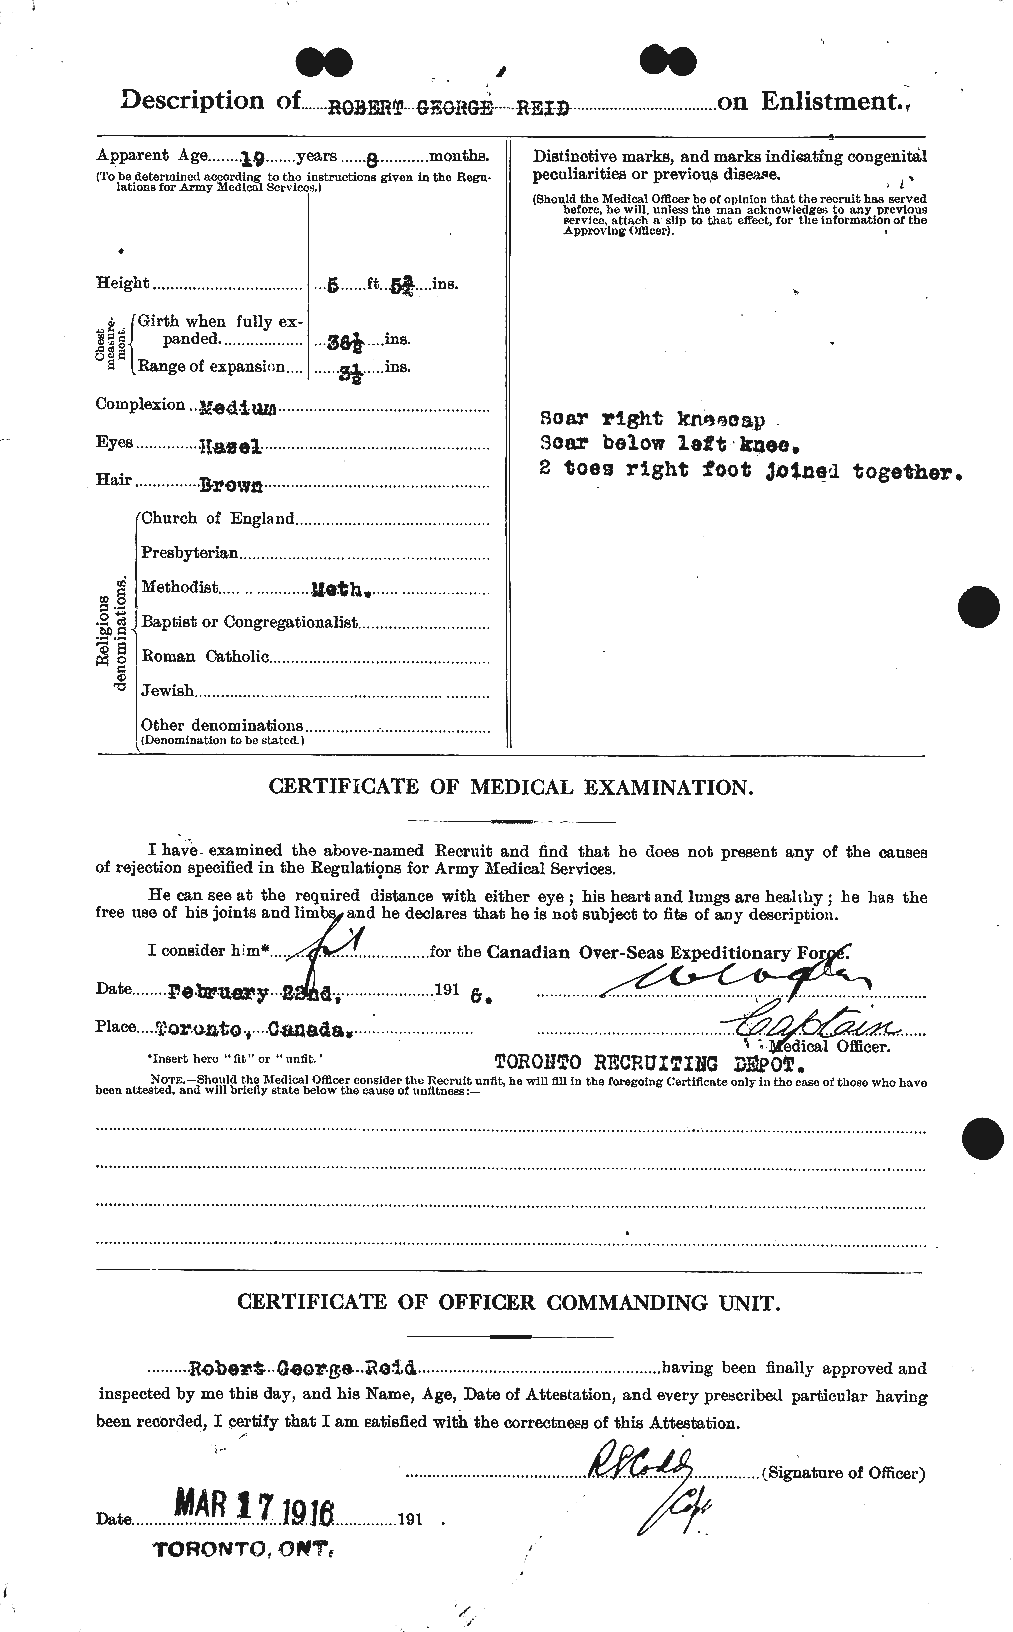 Personnel Records of the First World War - CEF 601901b